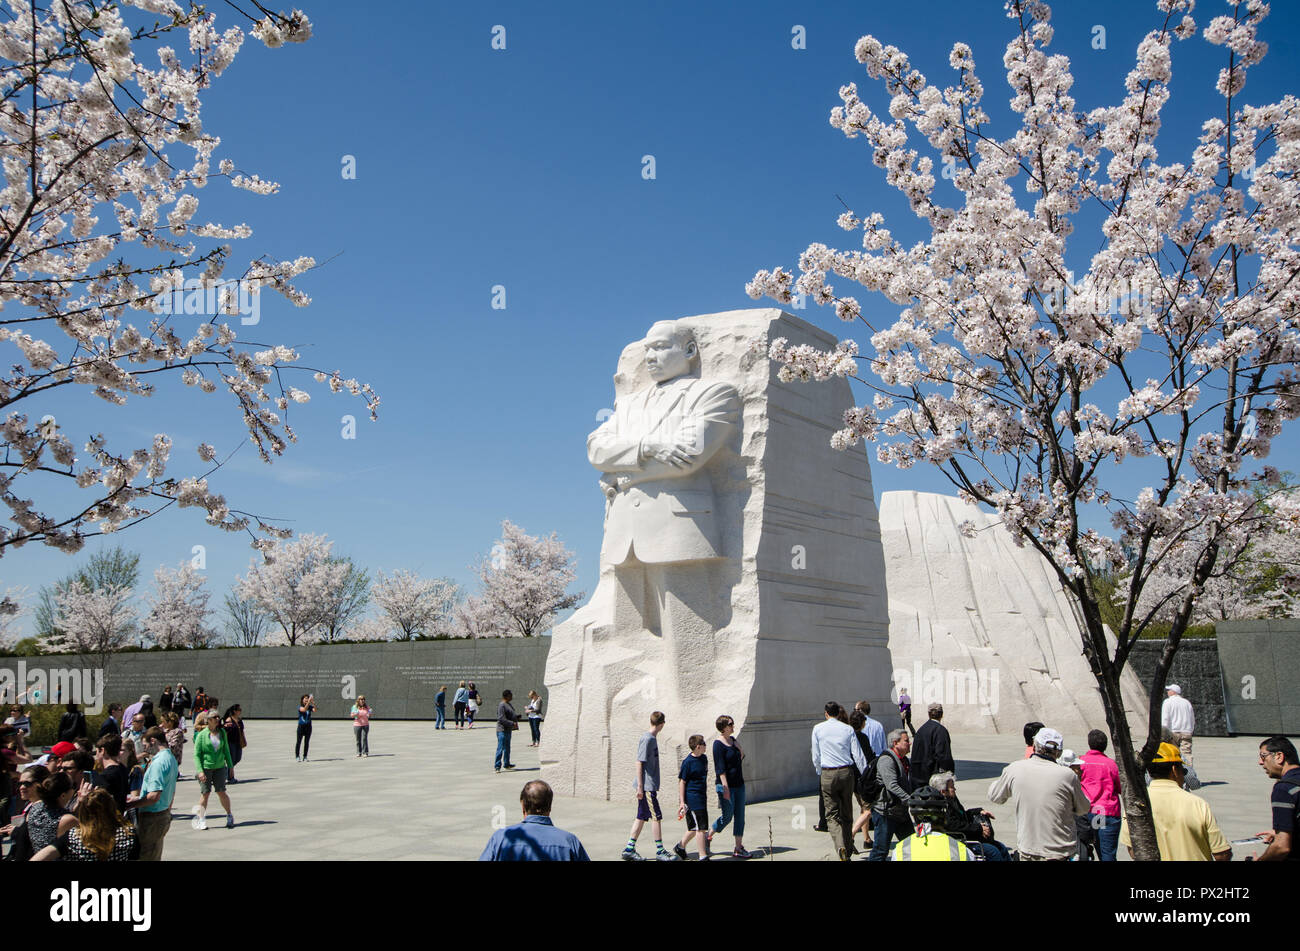 WASHINGTON, DC - APRIL 10, 2014: Tourists crowds gather around the Martin Luther King Jr. Memorial during Cherry Blossom Festival to pay respects and  Stock Photo